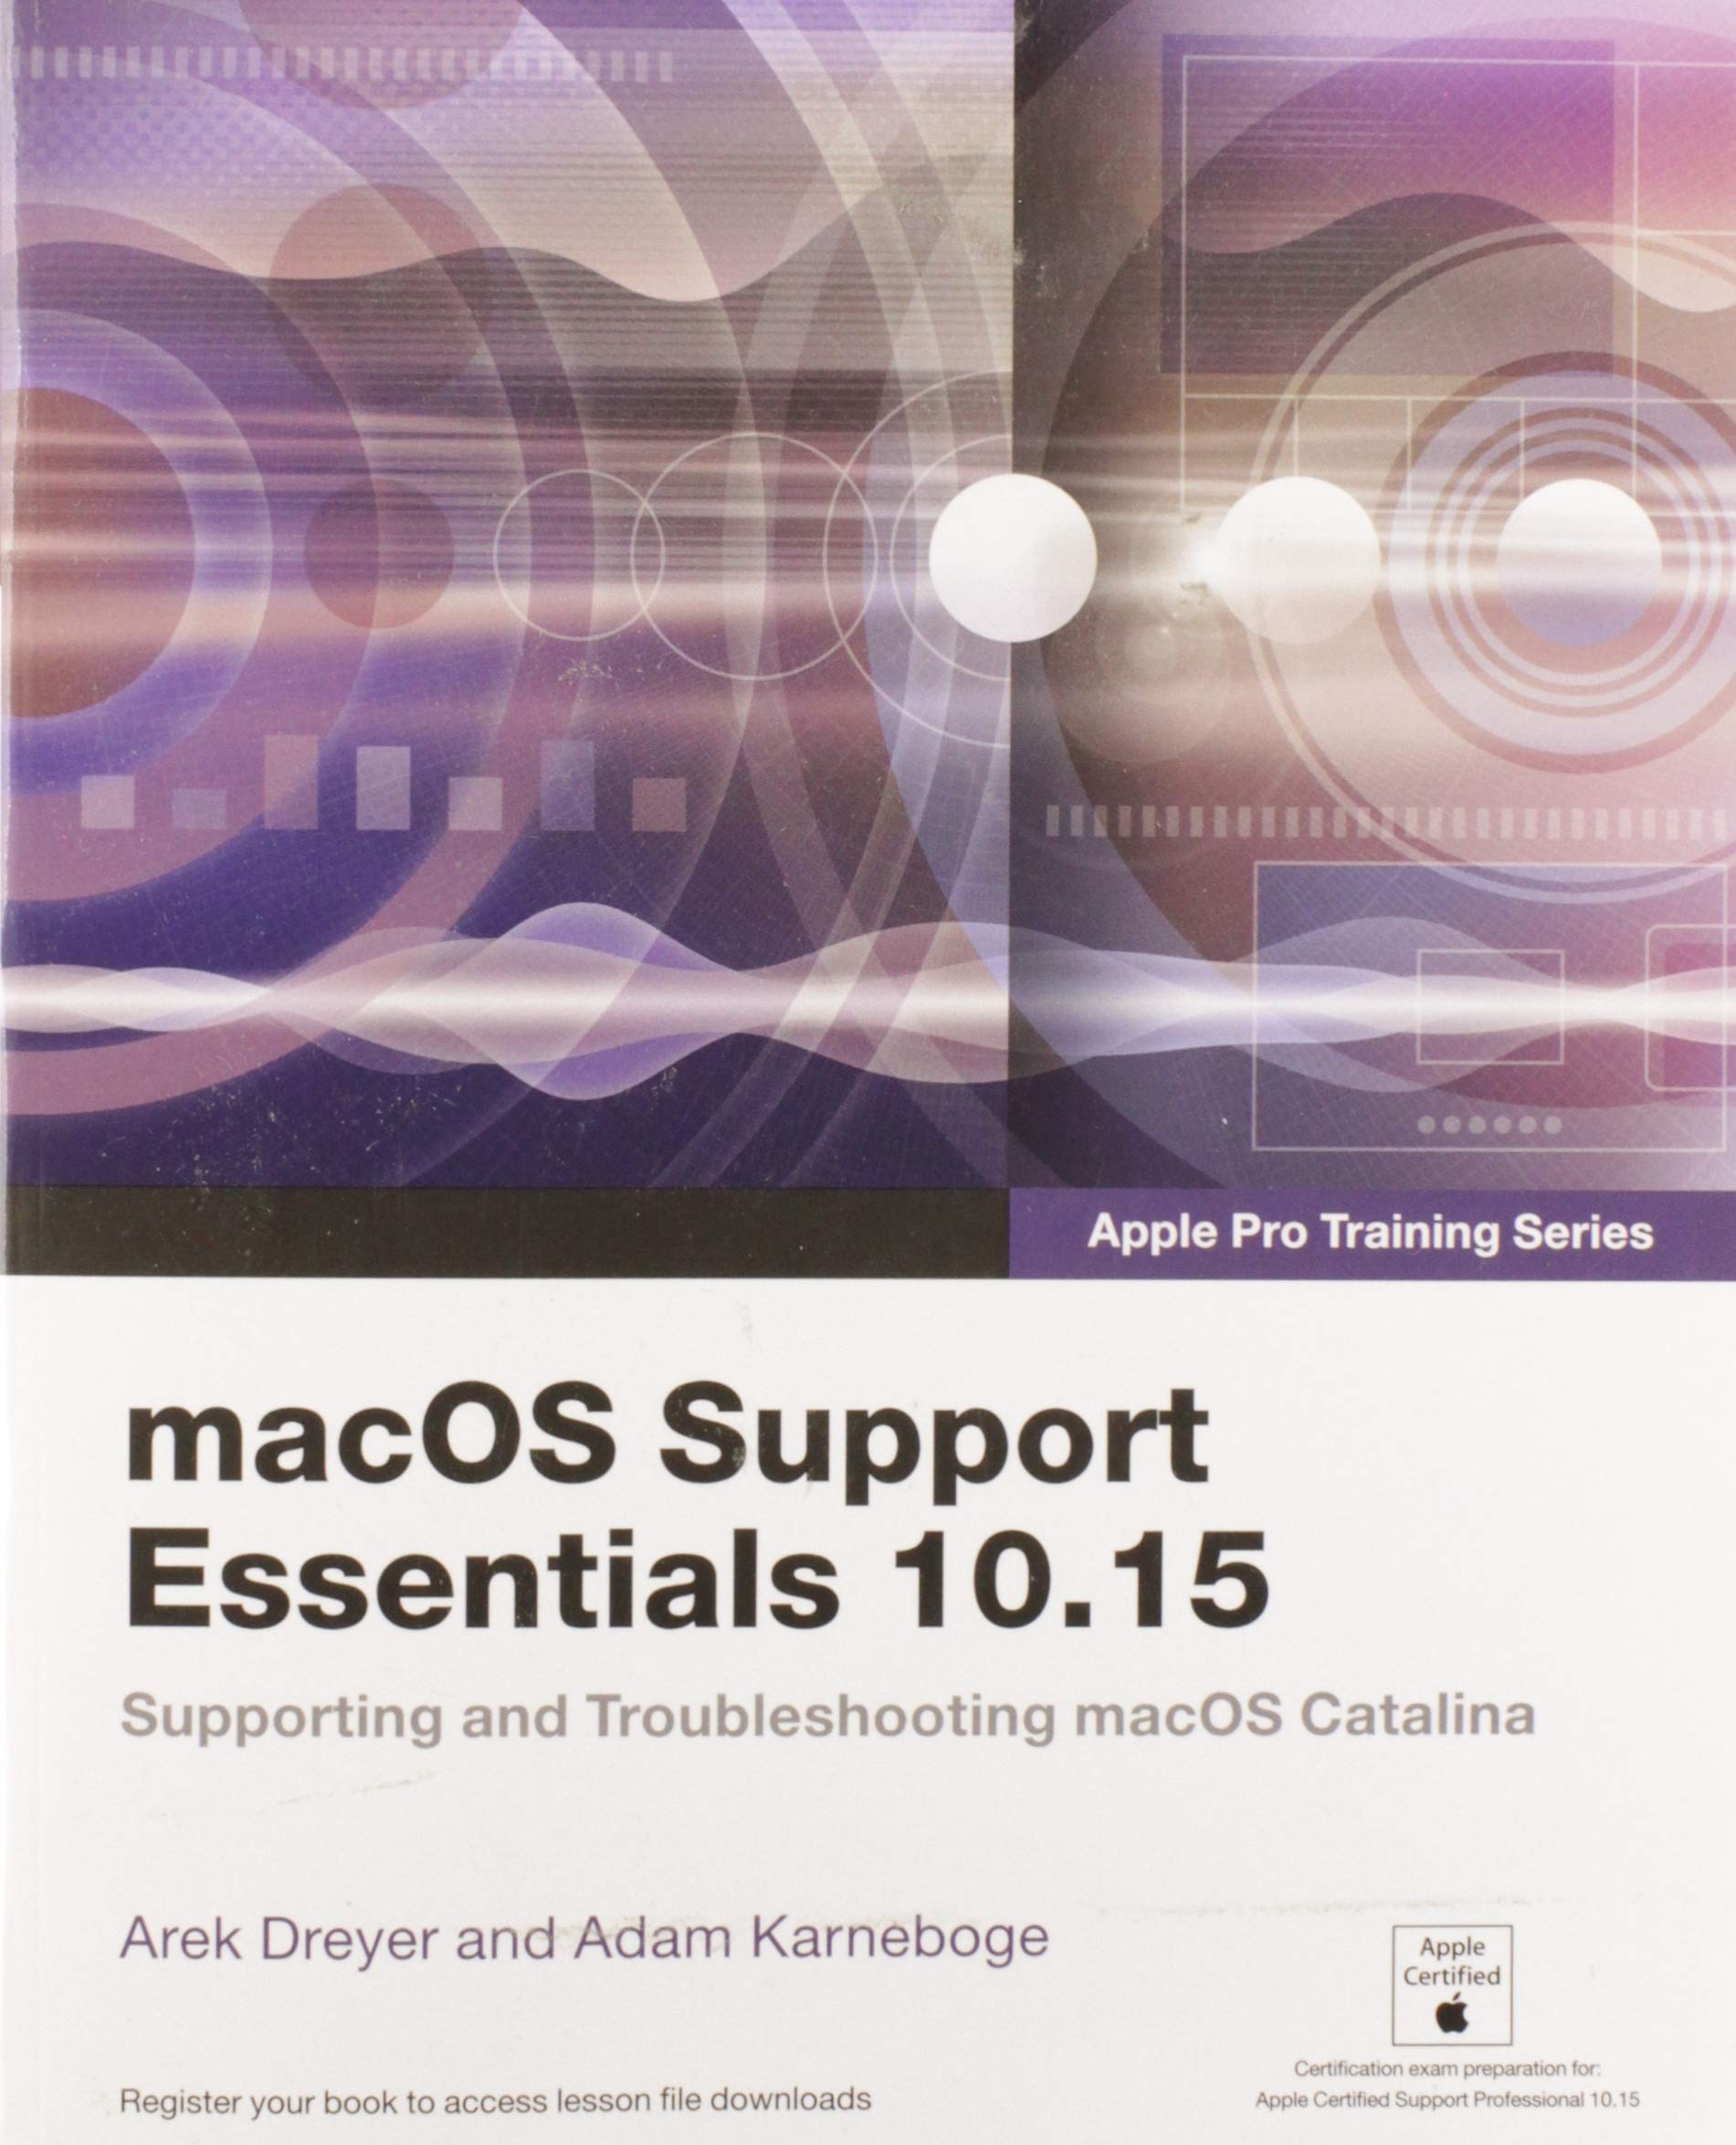 macOS Support Essentials 10.15 - Apple Pro Training Series: Supporting and Troubleshooting macOS Catalina